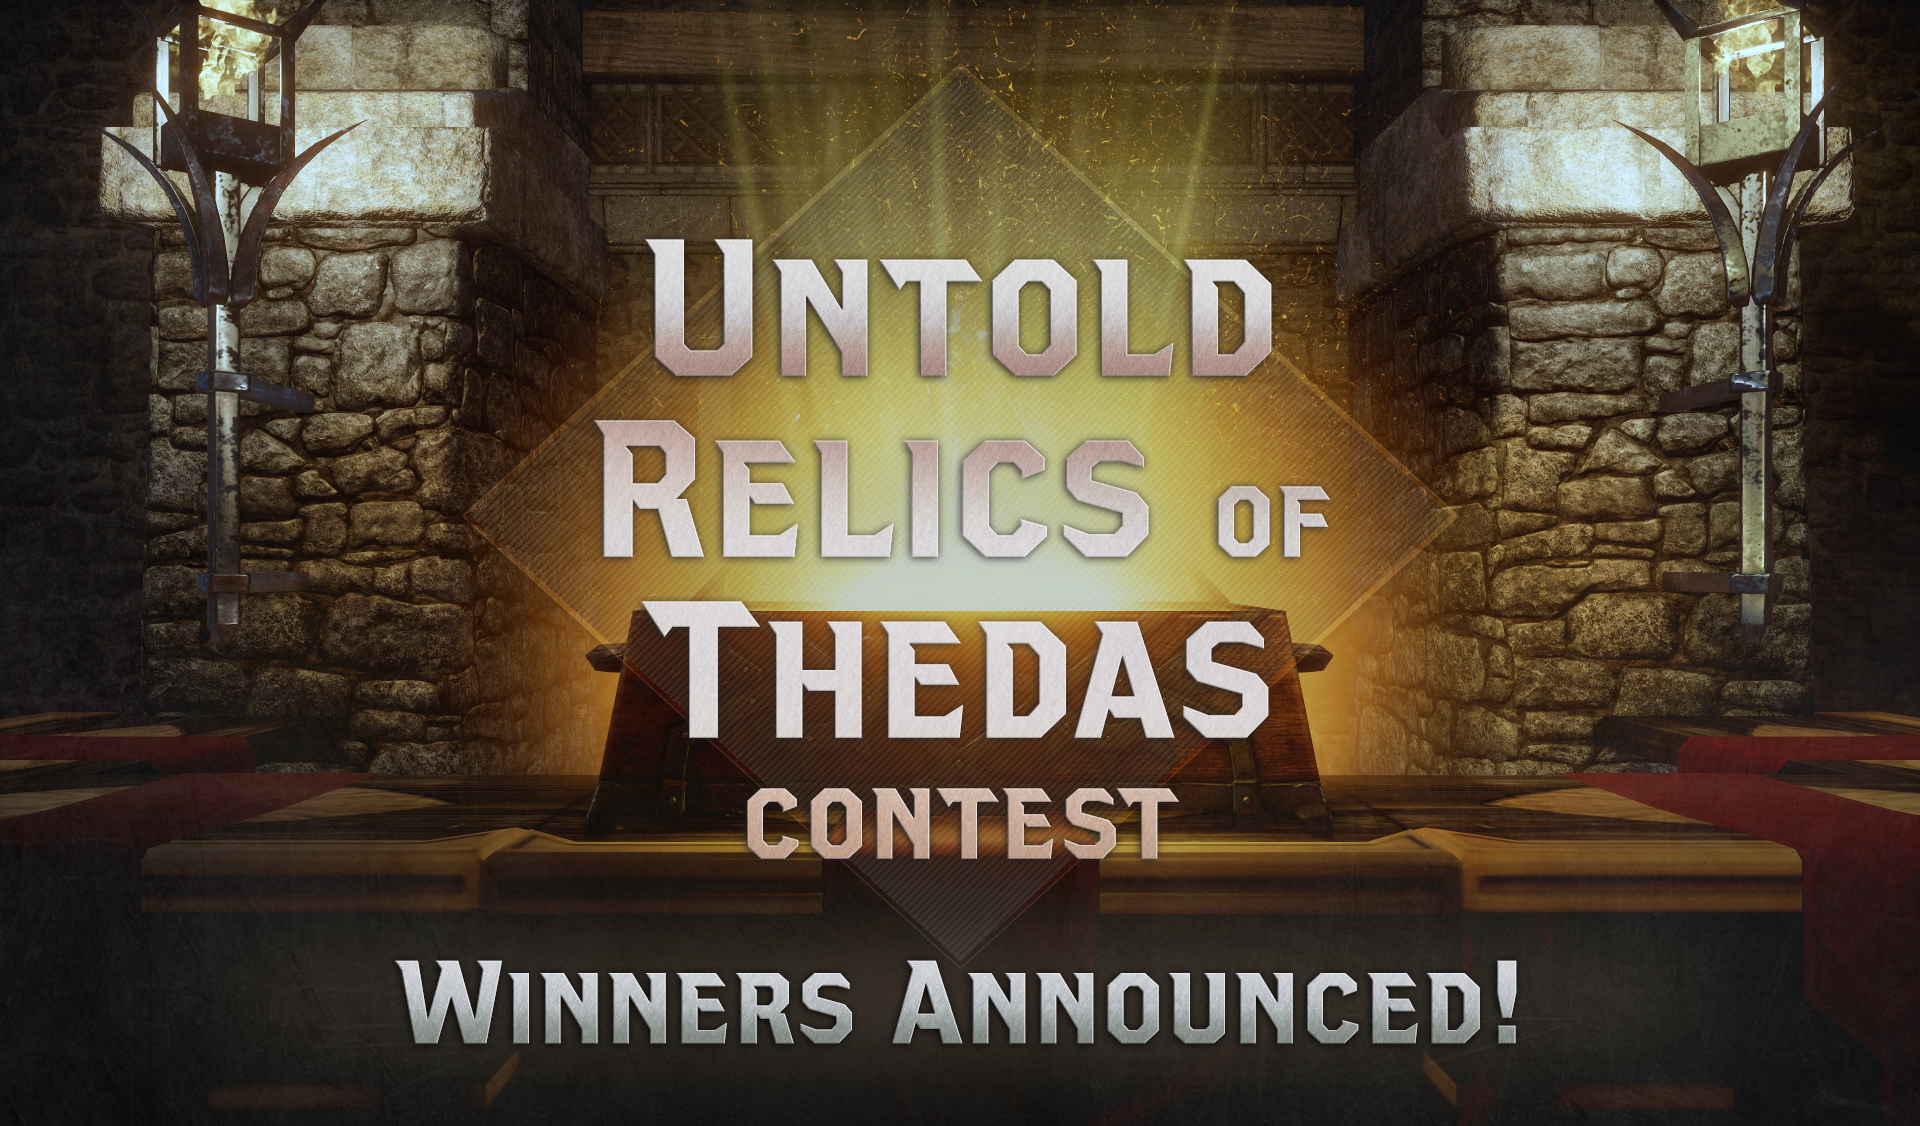 The RealReal - [UPDATE: CONTEST CLOSED. Winner announced on